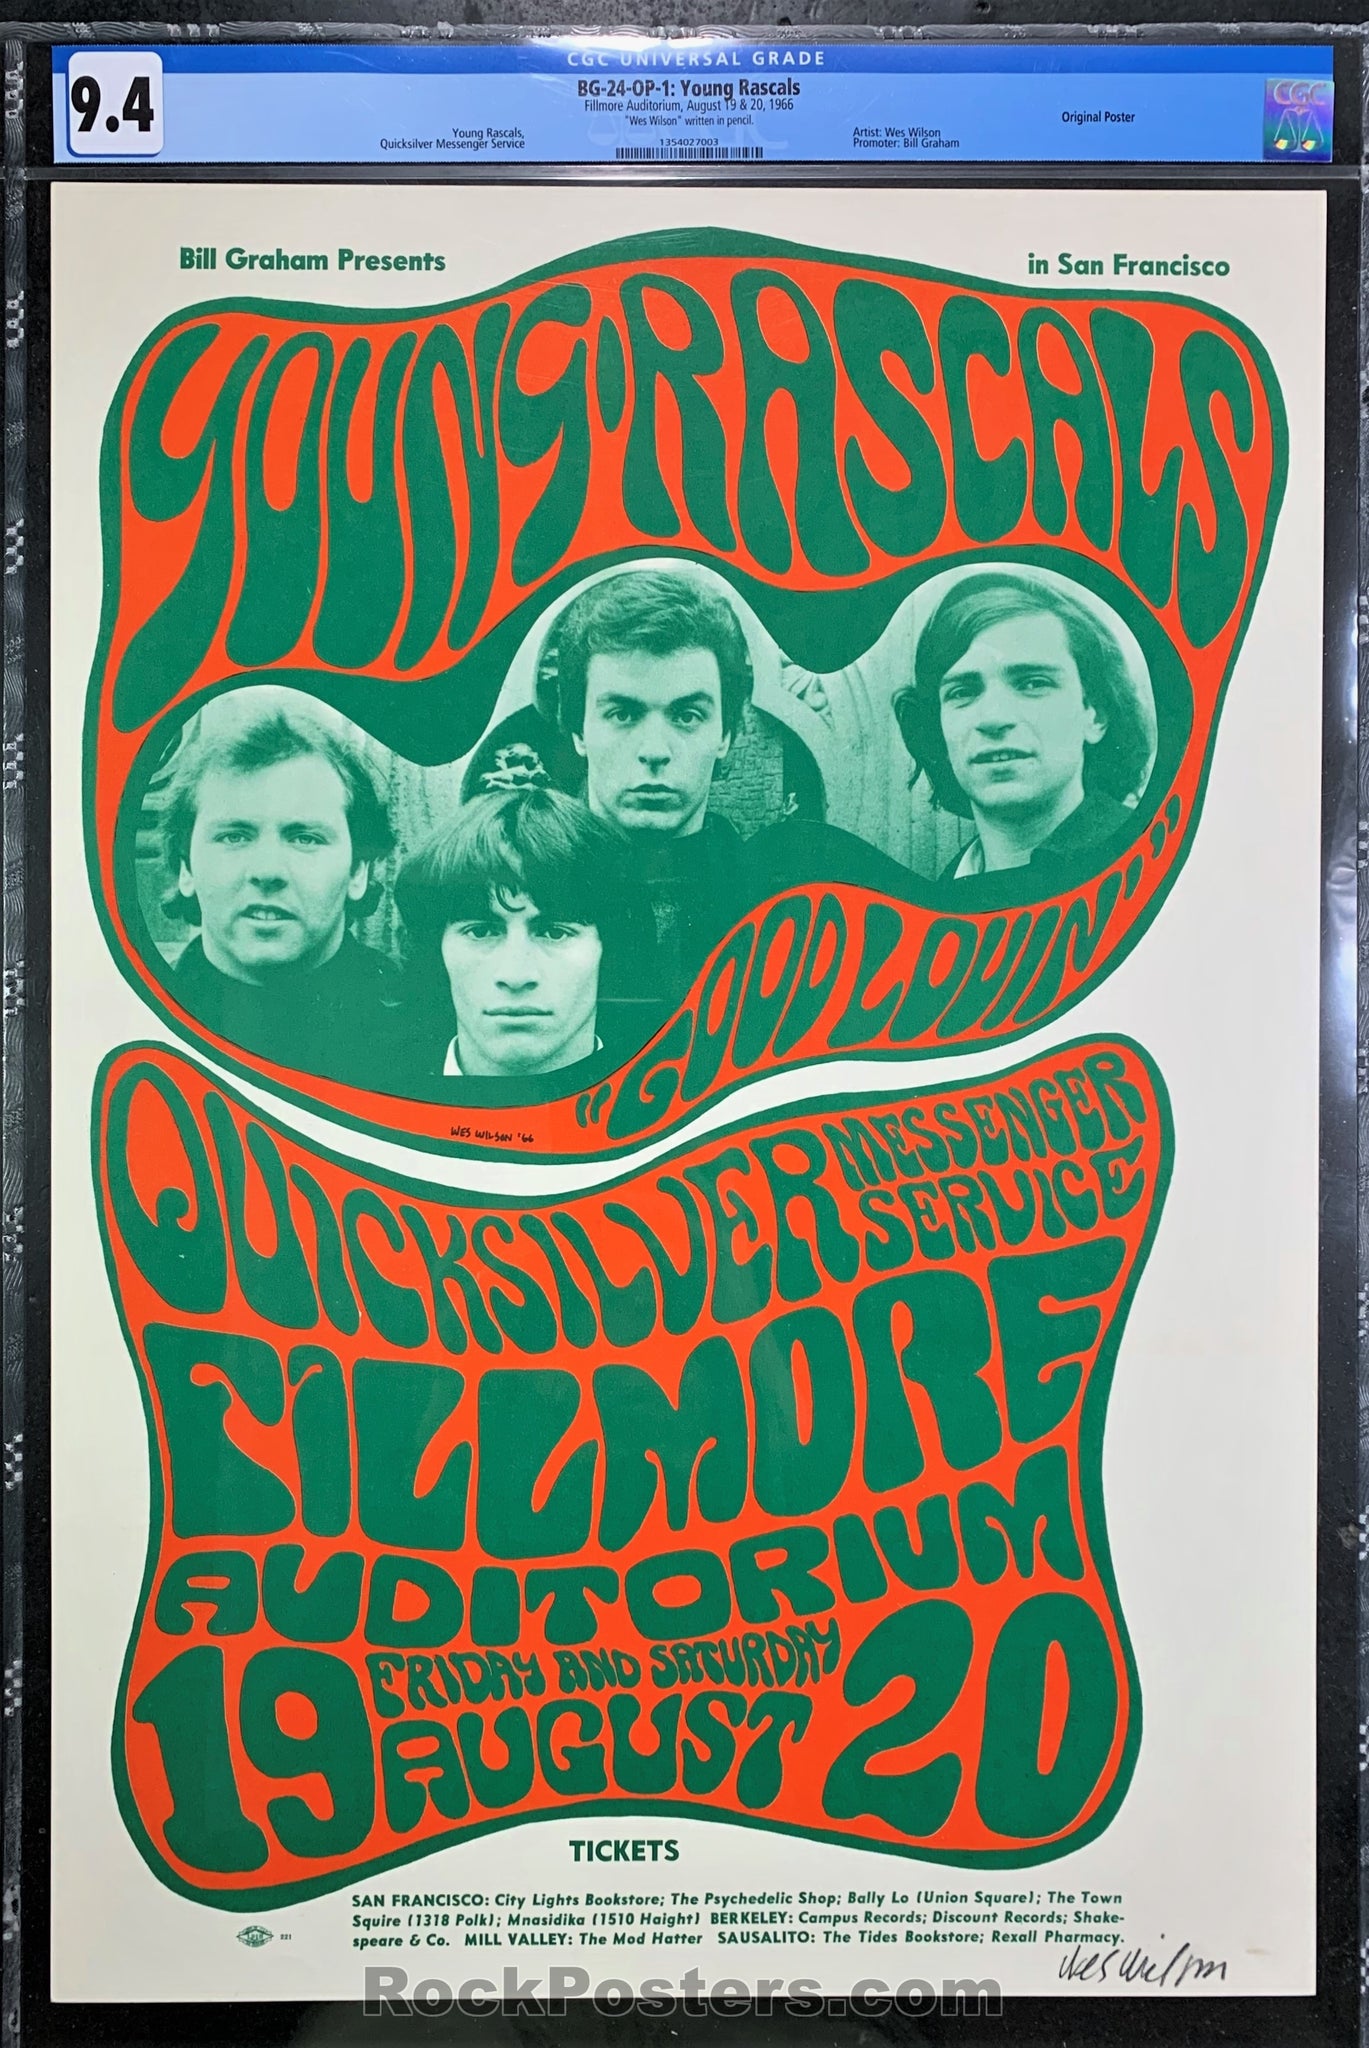 AUCTION - BG-24 - The Young Rascals - Wes Wilson SIGNED - 1966 Poster - Fillmore Auditorium - CGC Graded 9.4